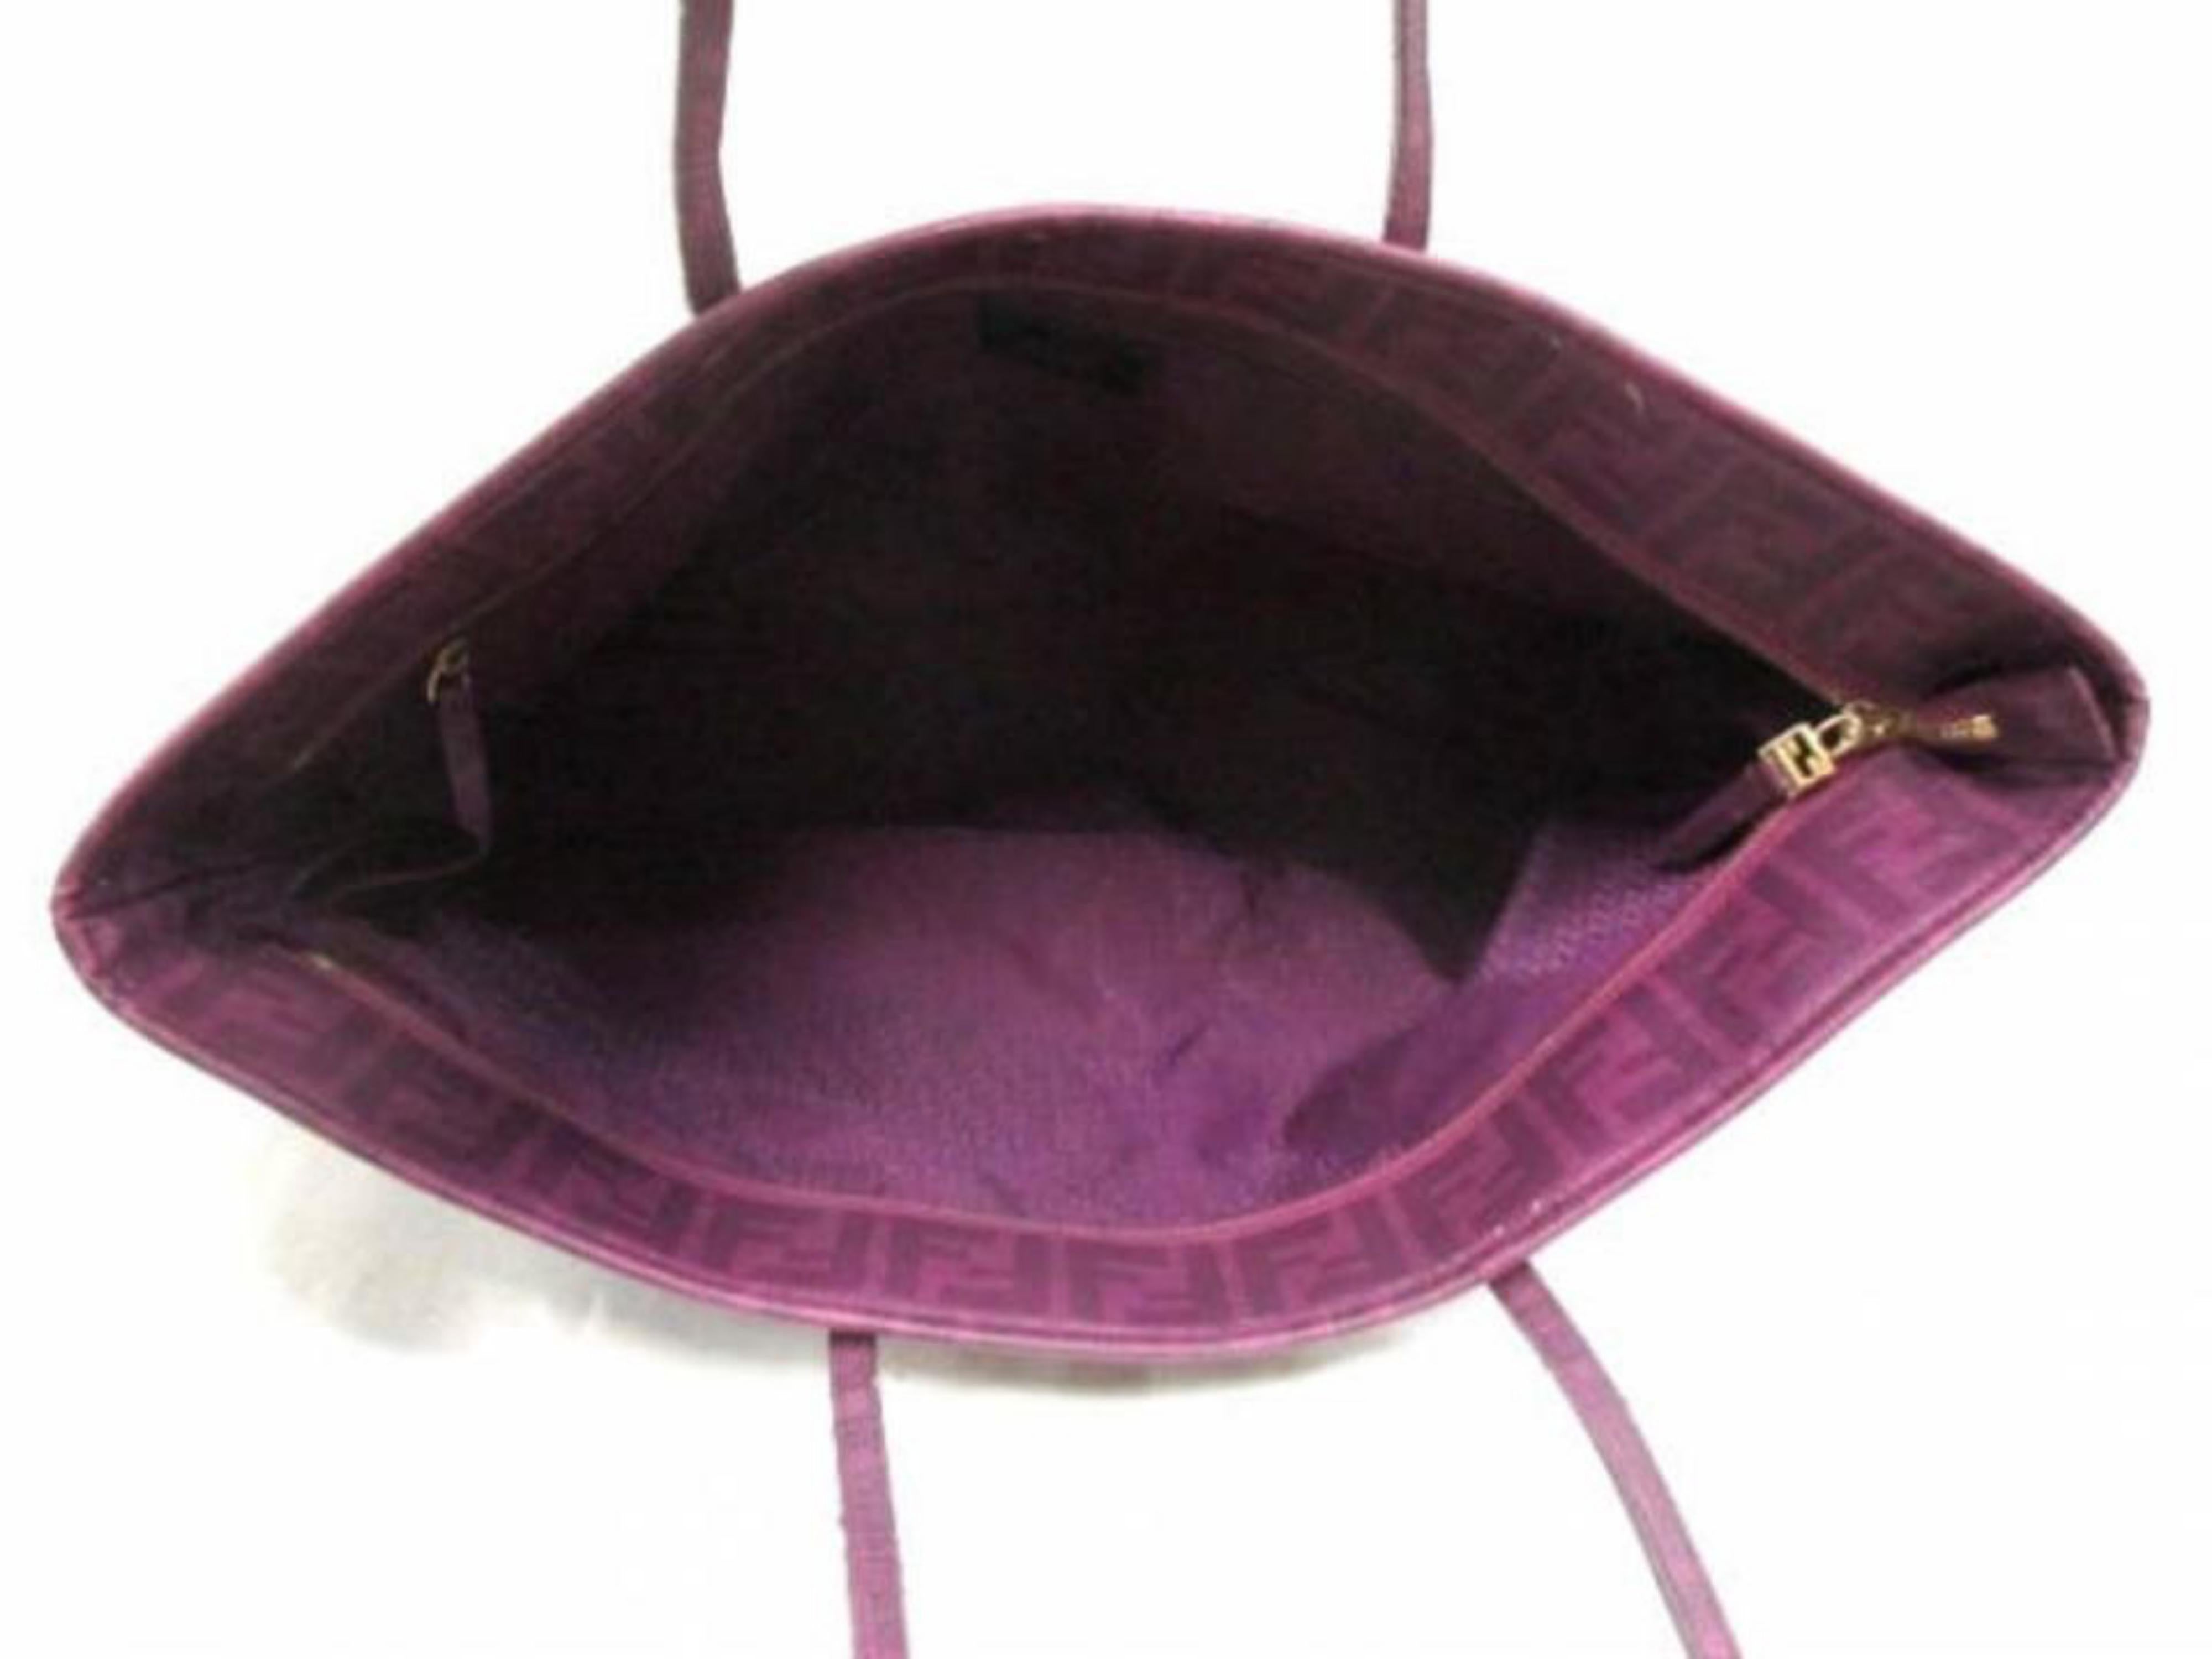 Fendi Perforated Laser Cut Out Tote 228077 Purple Coated Canvas Shoulder Bag In Good Condition For Sale In Forest Hills, NY